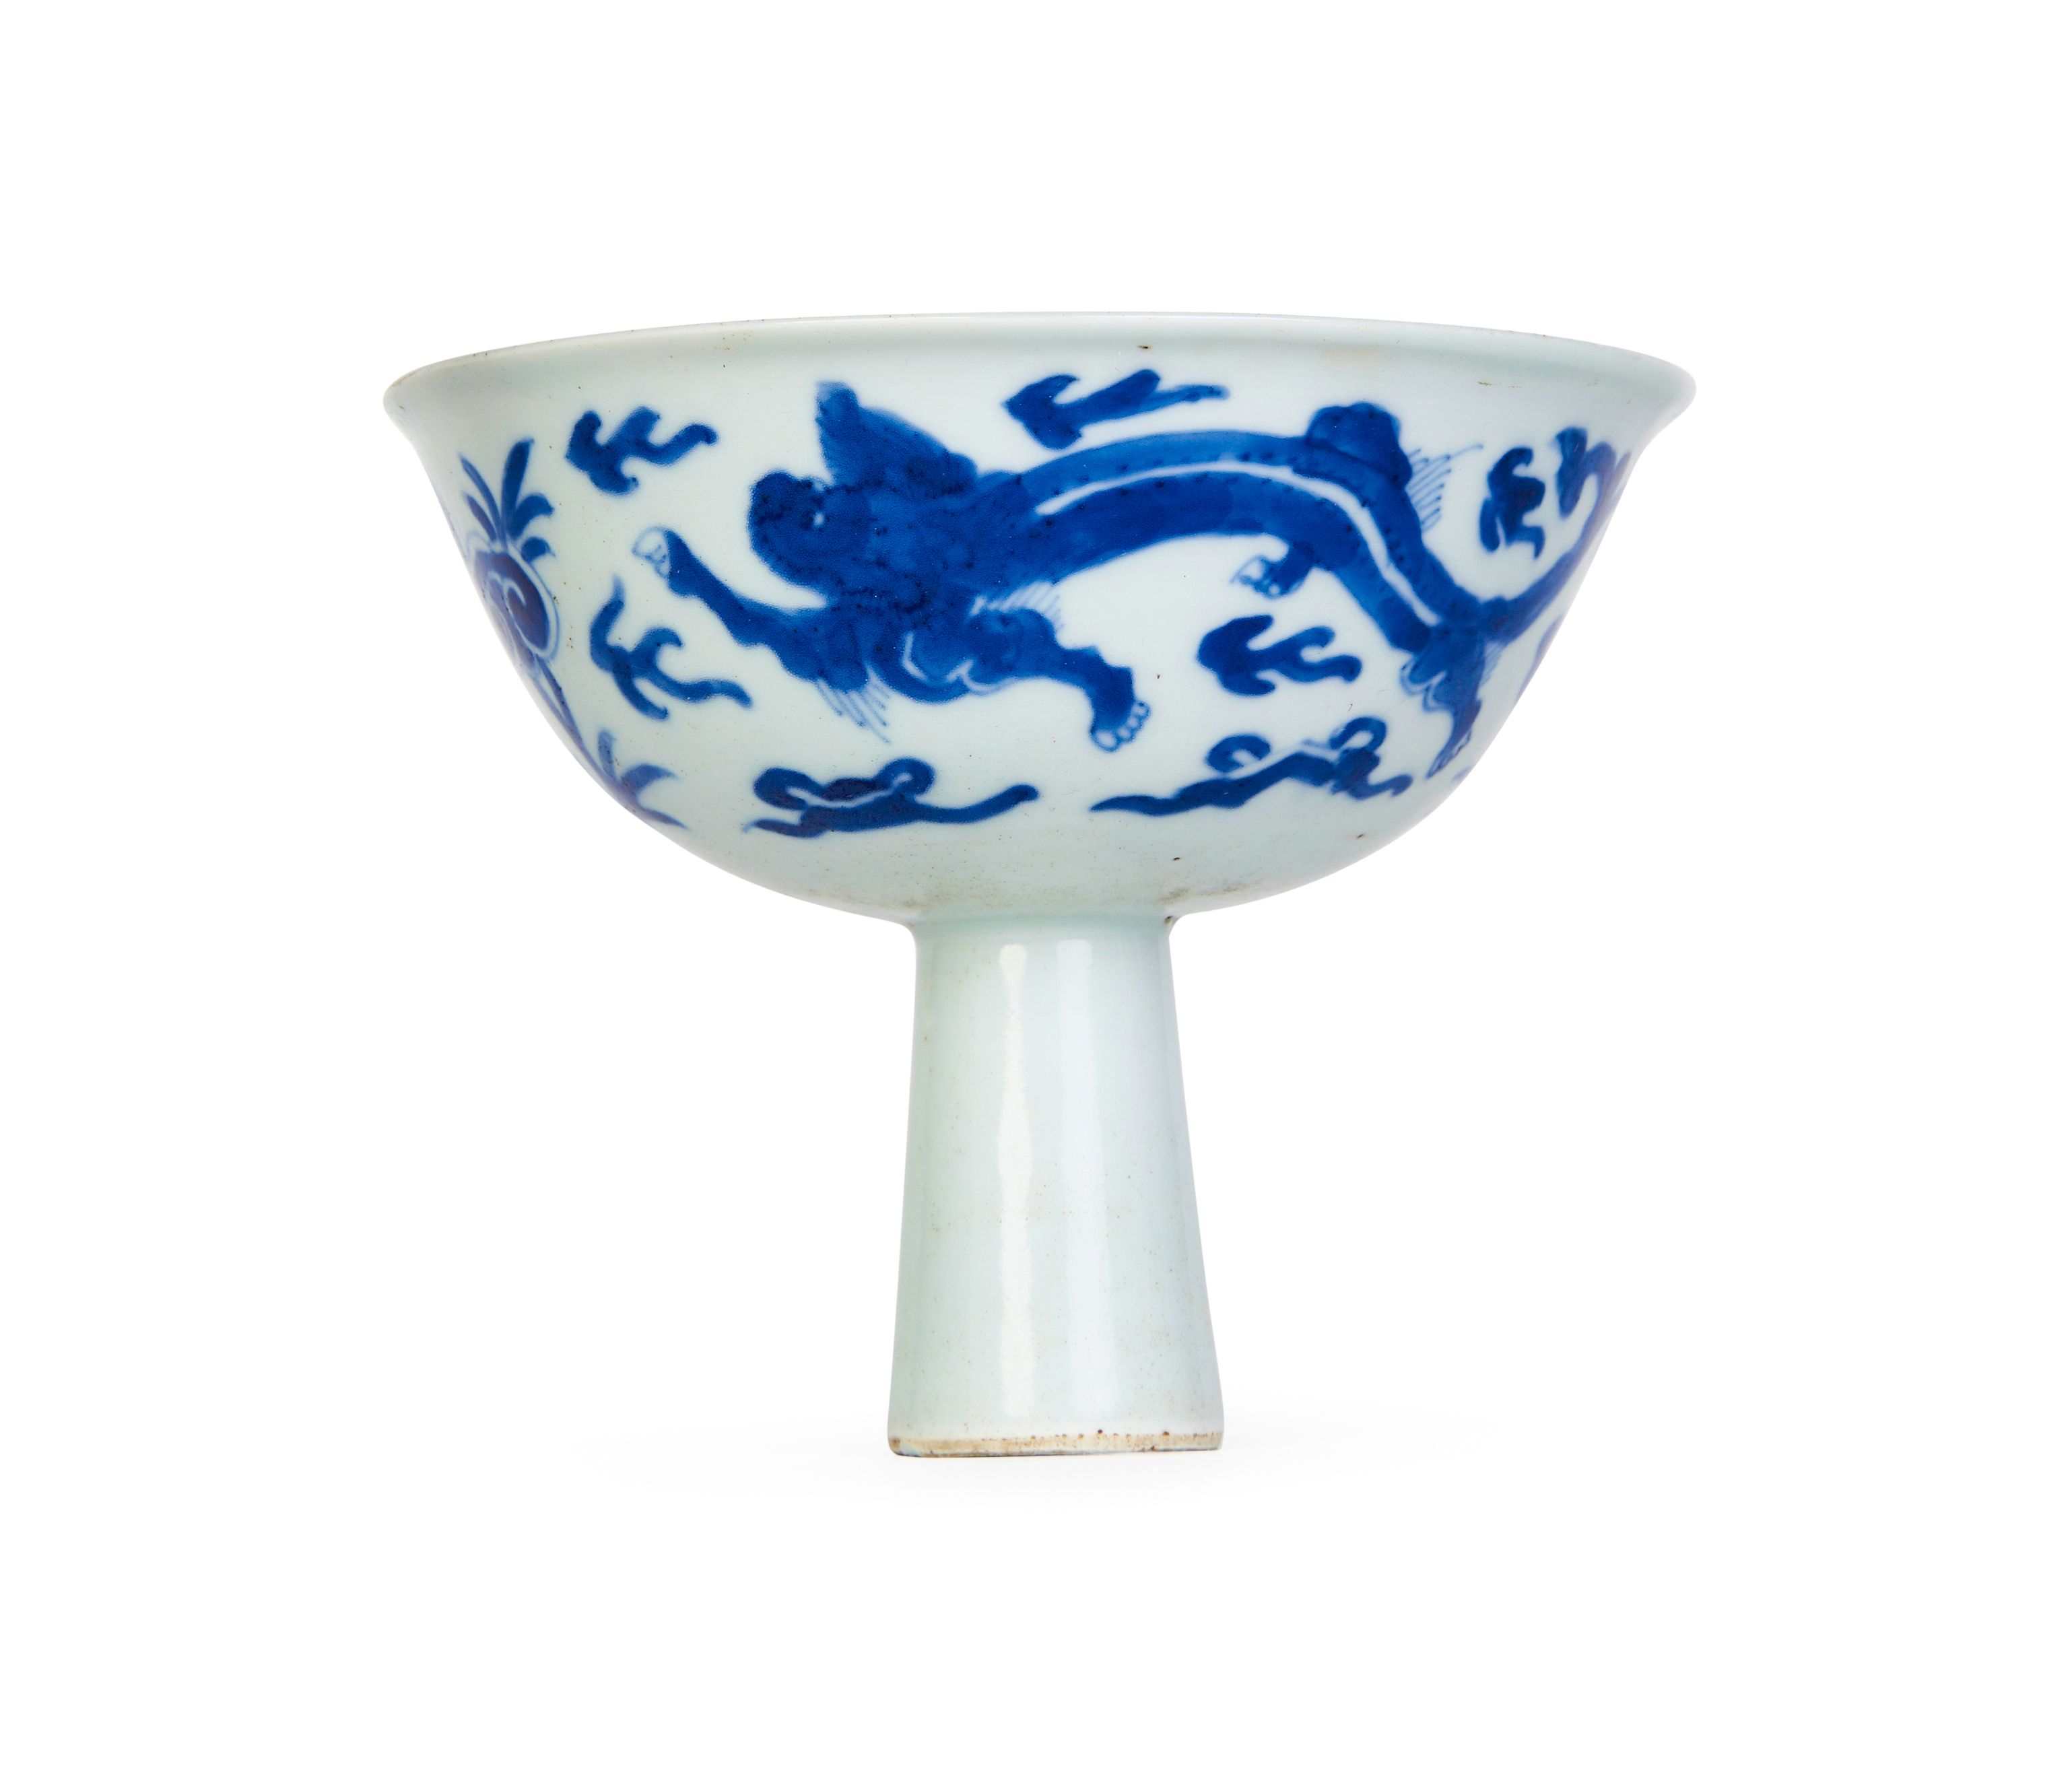 A CHINESE BLUE & WHITE STEM CUP, QING DYNASTY (1644-1911) - Image 2 of 2